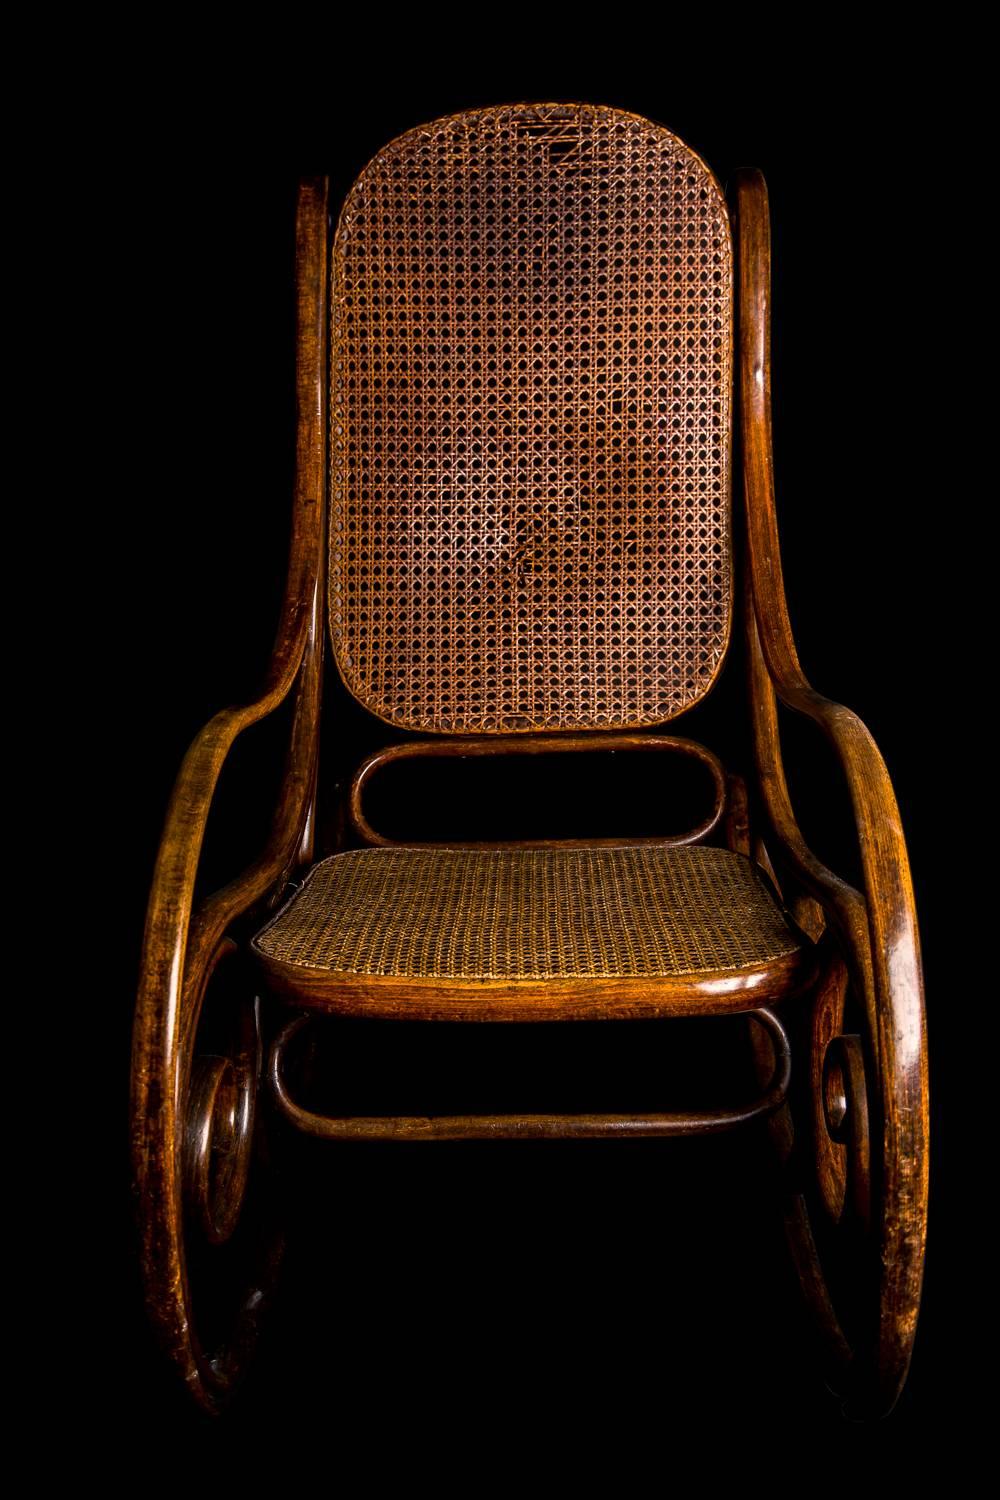 Original and authenticated Thonet model No. 1. Superb patina and coloring, structurally excellent - timeless design elegance, a collectors dream.

A masterpiece of craftsmanship: 
The first rocking chair in the world that was manufactured from